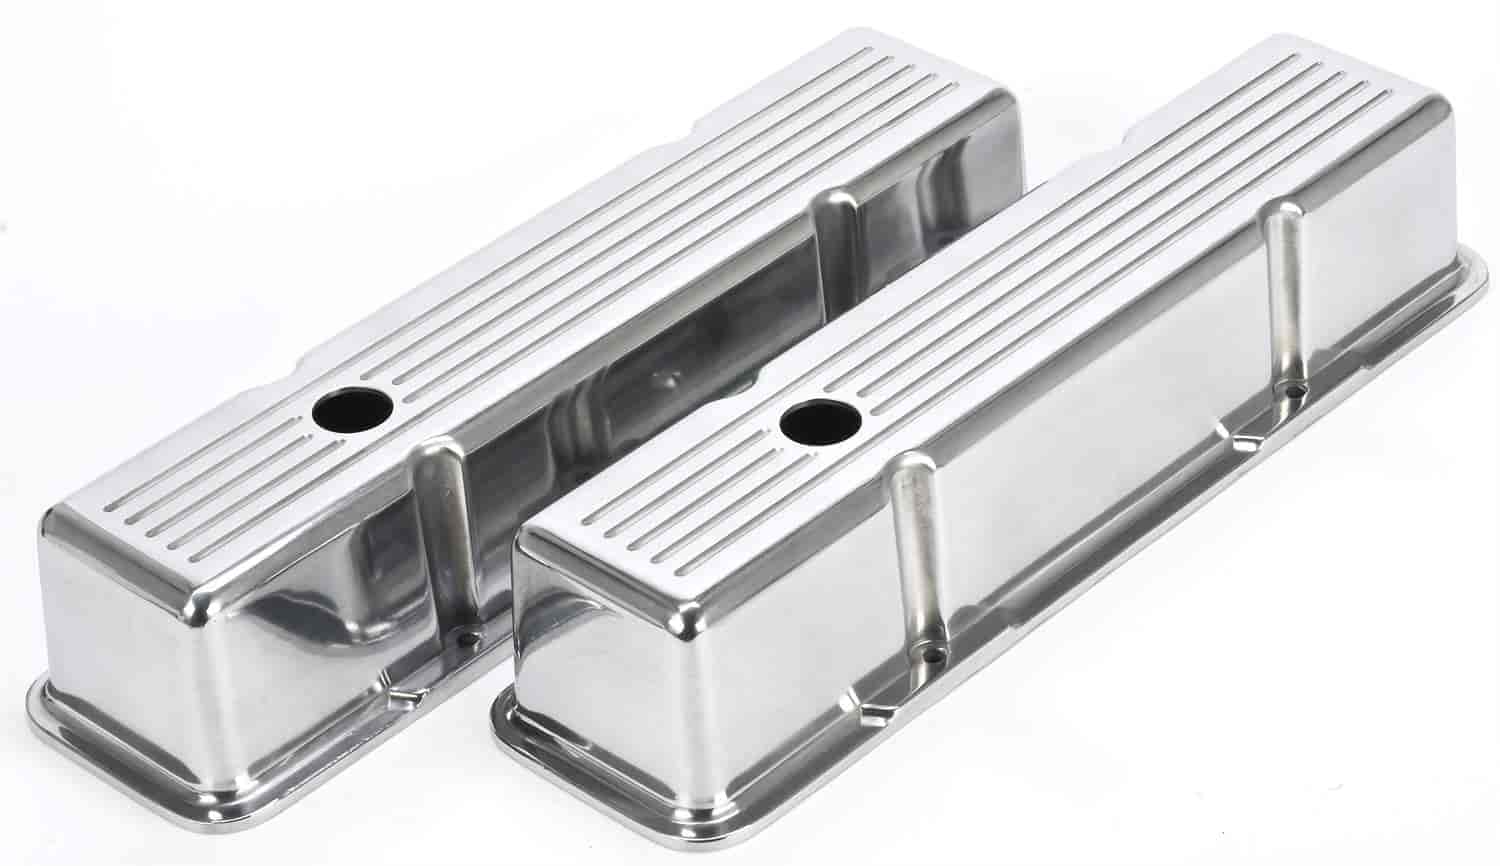 Polished Cast Aluminum Ball-Milled Valve Covers for Small Block Chevy